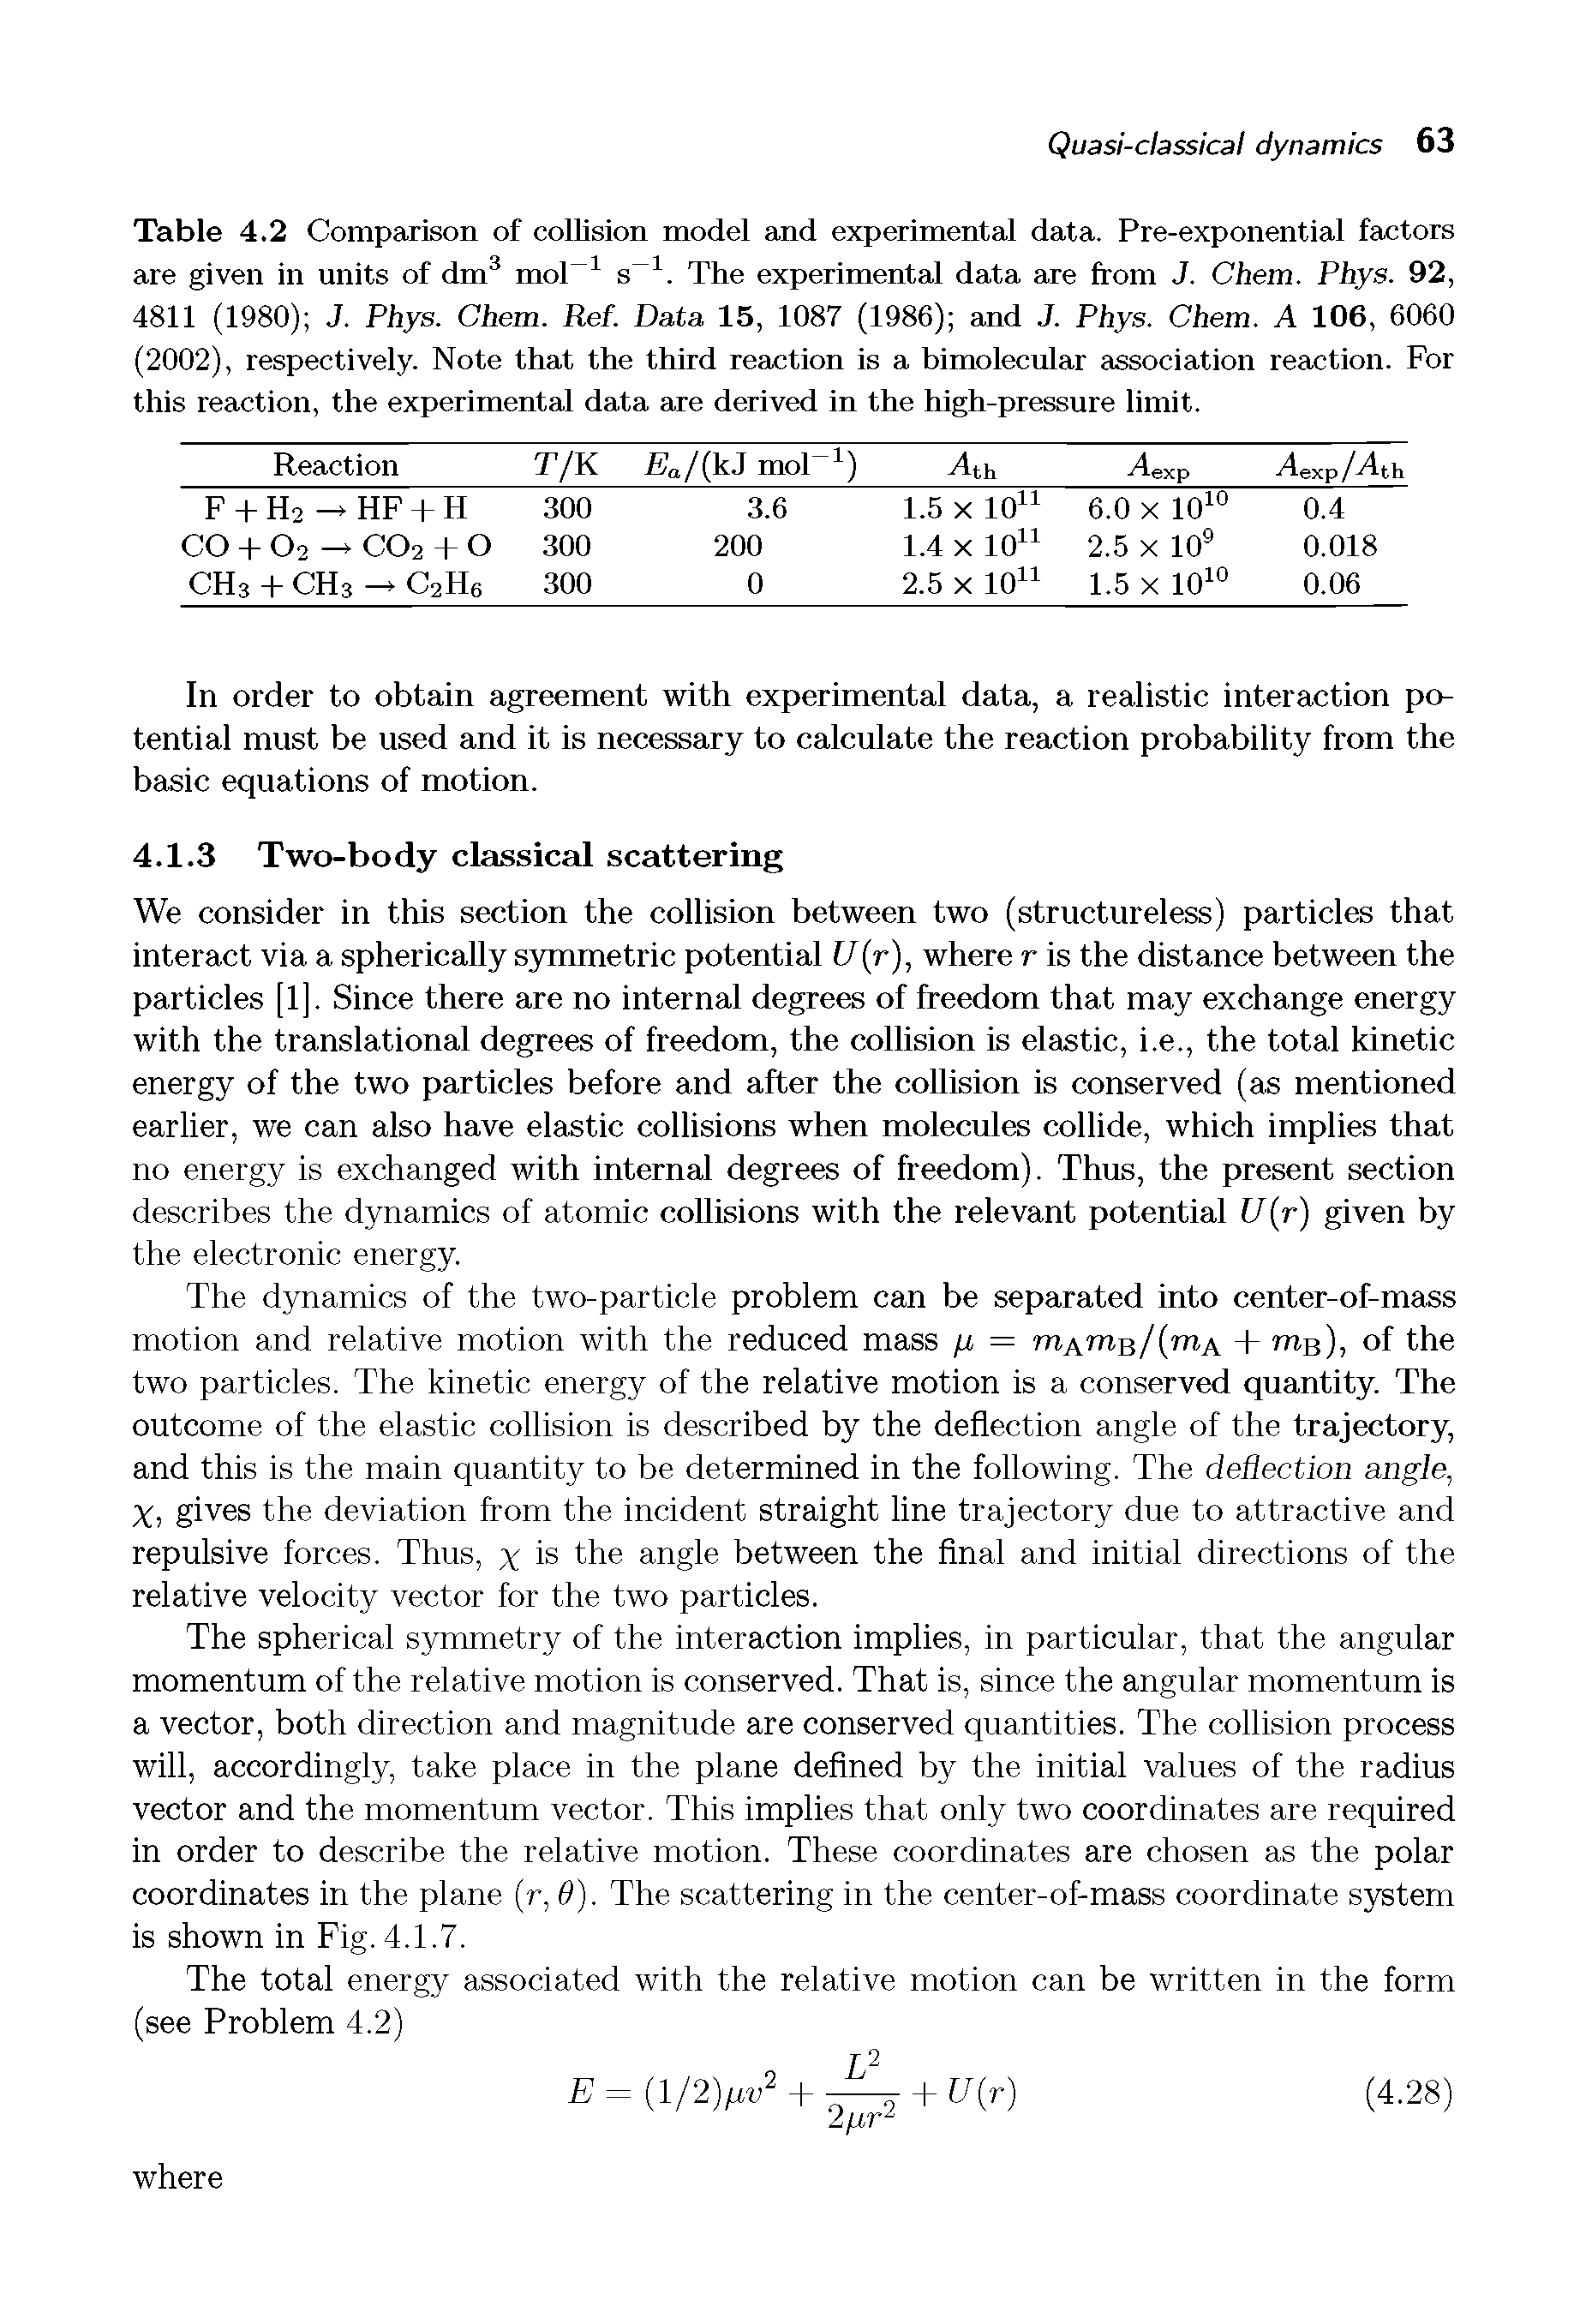 Table 4.2 Comparison of collision model and experimental data. Pre-exponential factors are given in units of dm3 mol-1 s 1. The experimental data are from J. Chem. Phys. 92, 4811 (1980) J. Phys. Chem. Ref. Data 15, 1087 (1986) and J. Phys. Chem. A 106, 6060 (2002), respectively. Note that the third reaction is a bimolecular association reaction. For this reaction, the experimental data are derived in the high-pressure limit.